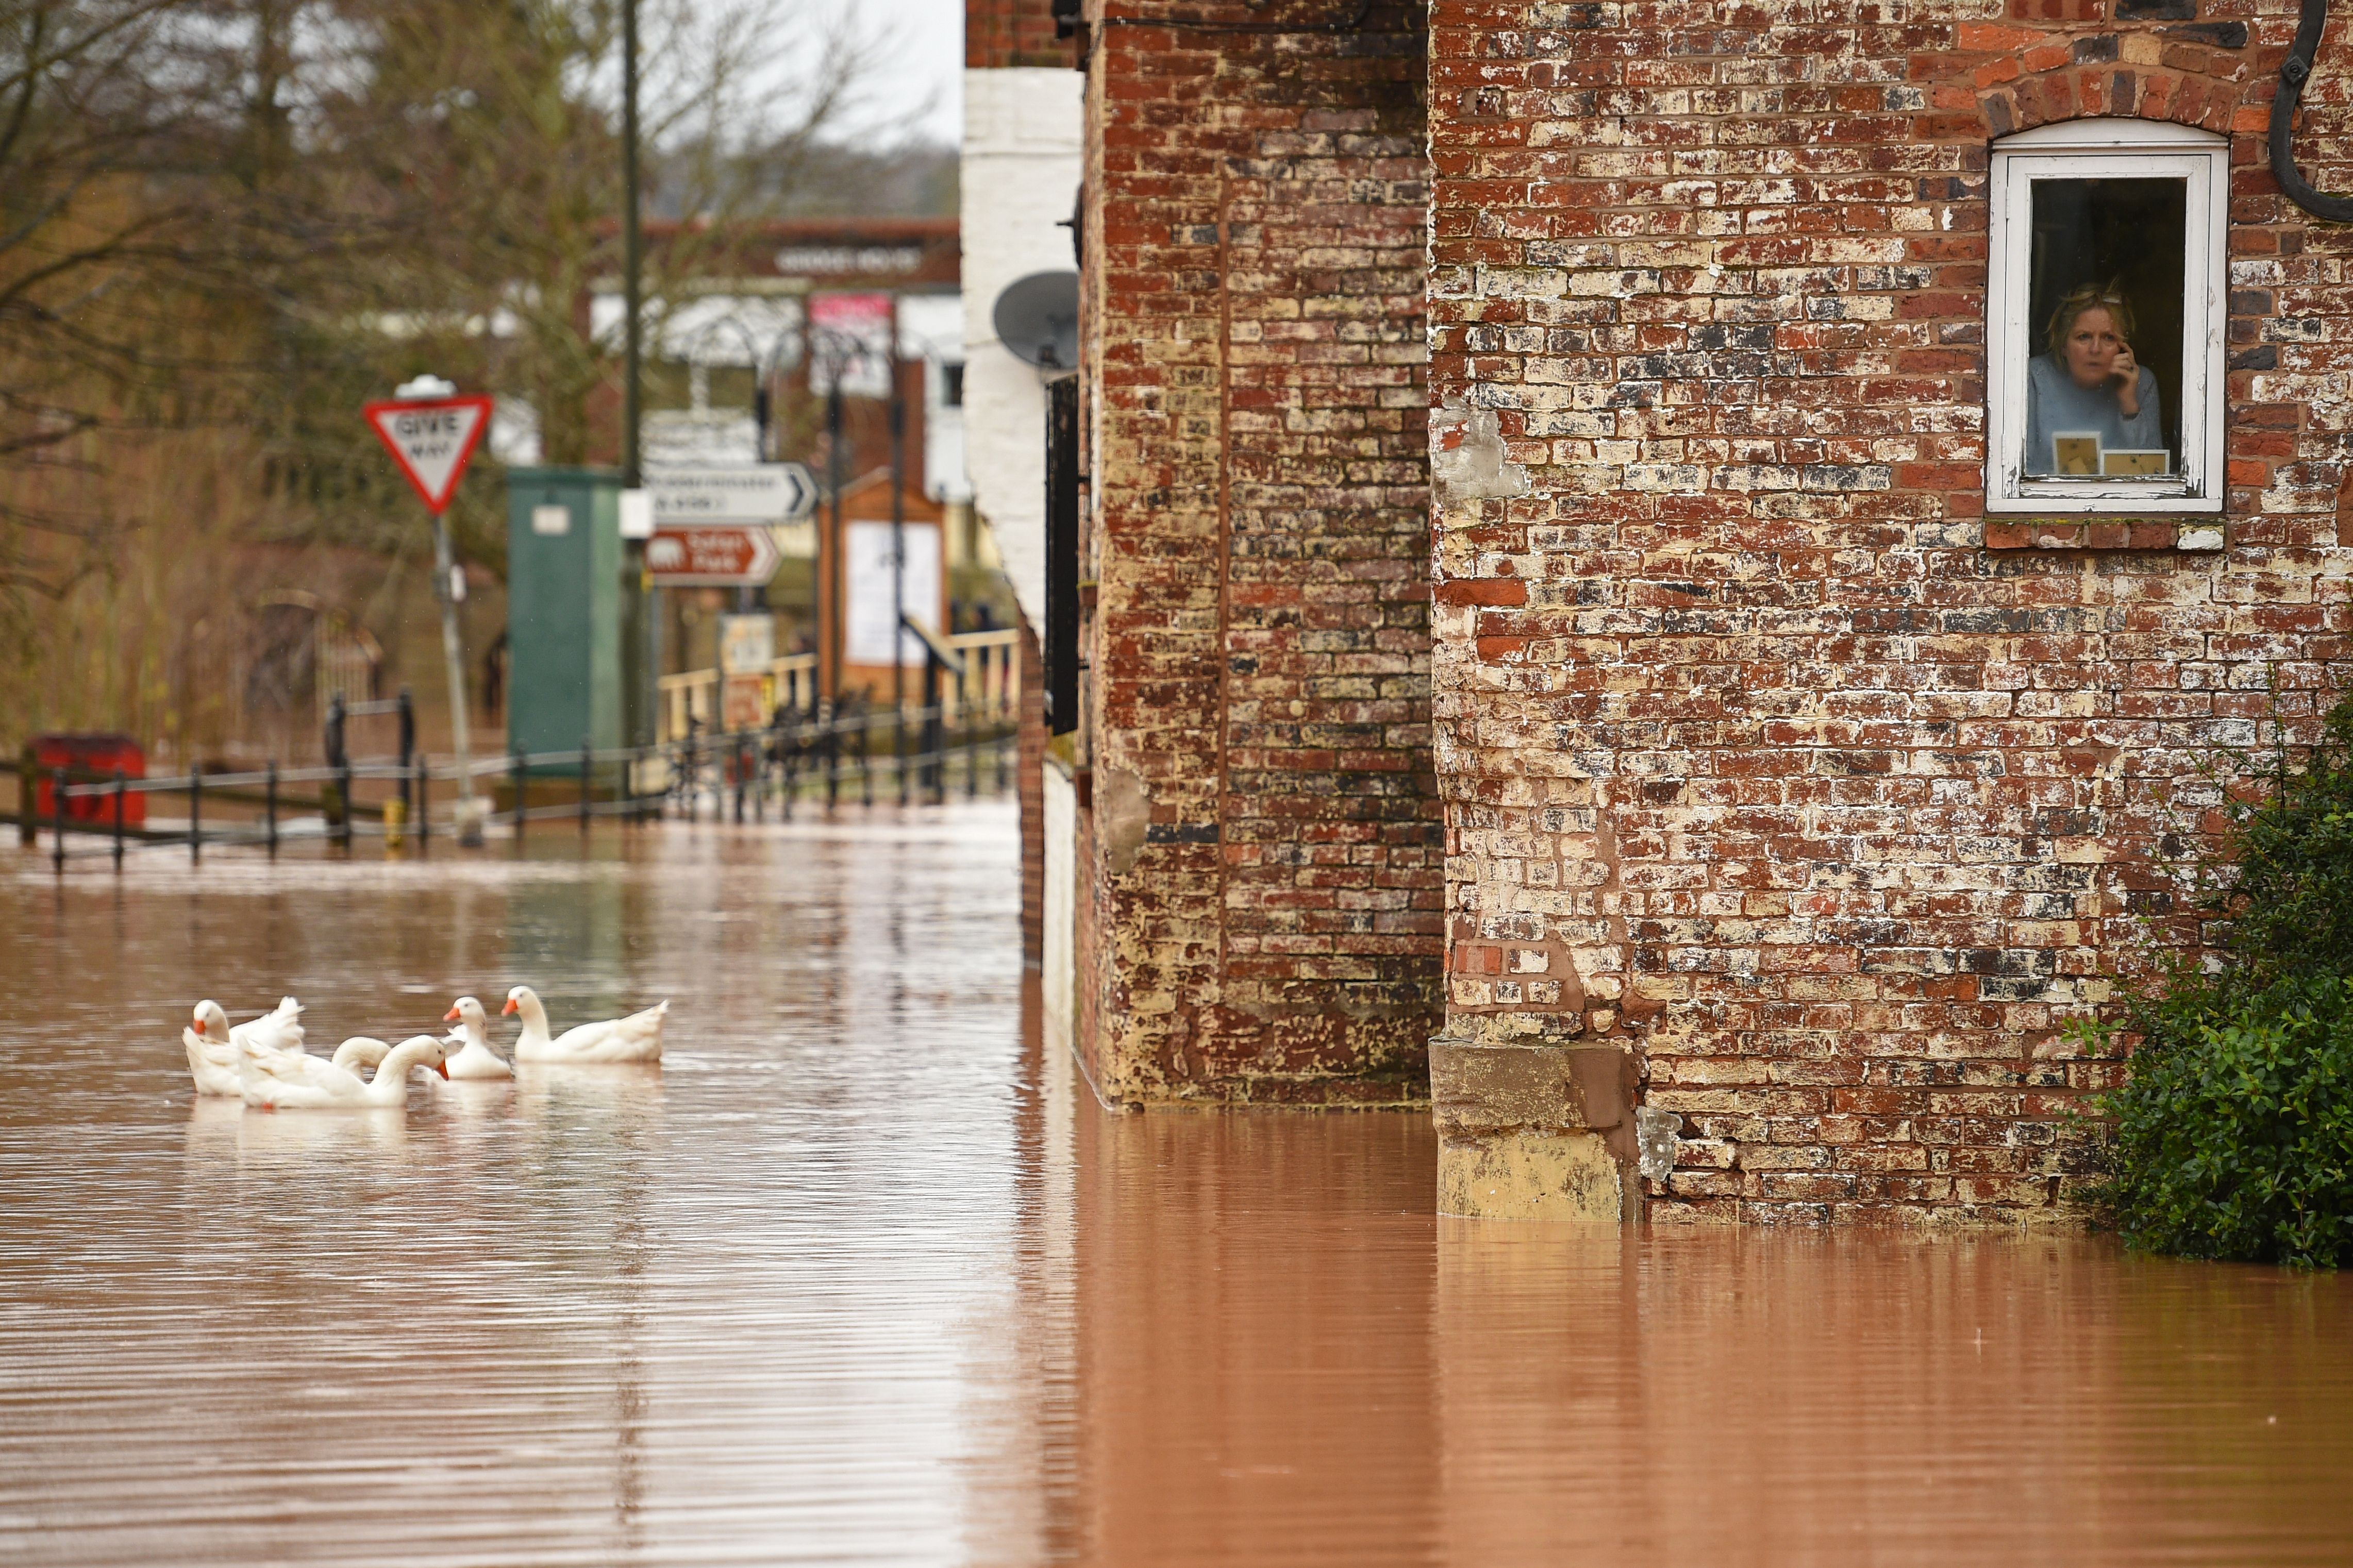 A woman looks out of her window as geese swim past in floodwater after the River Severn bursts it's banks in Bewdley, west of Birmingham on February 16